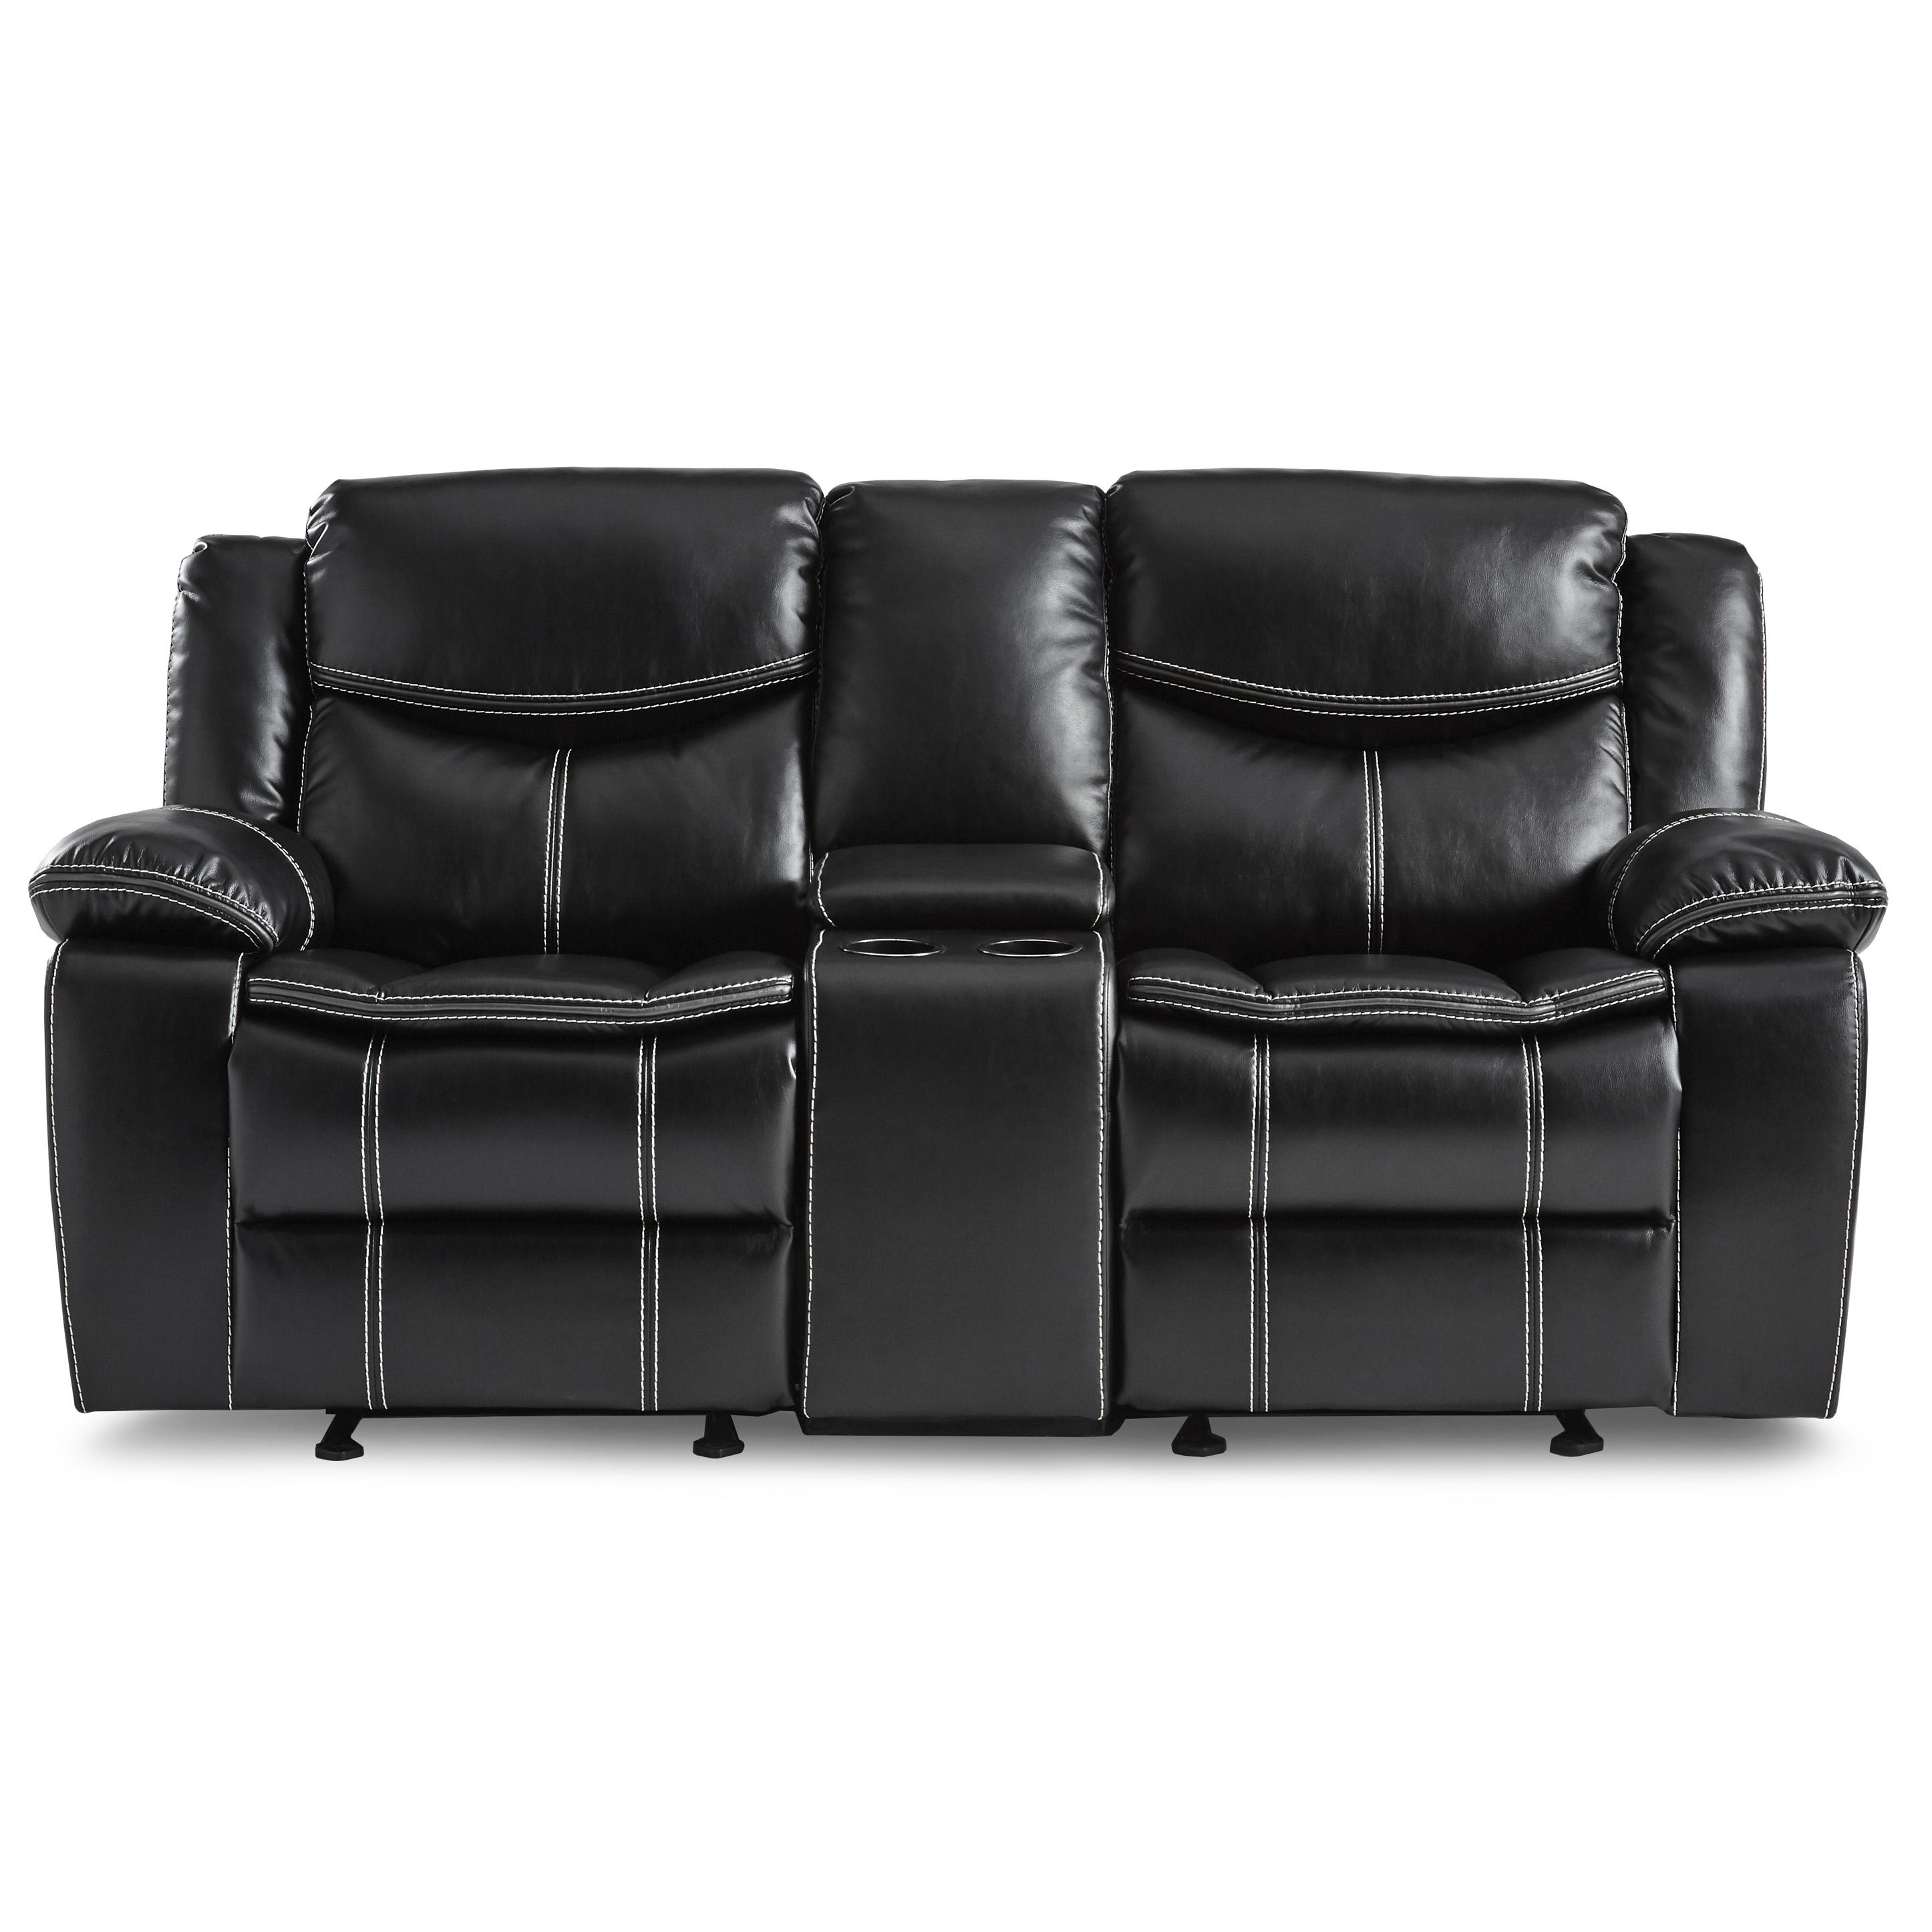 Transitional Reclining Loveseat 8230BLK-2 Bastrop 8230BLK-2 in Black Faux Leather